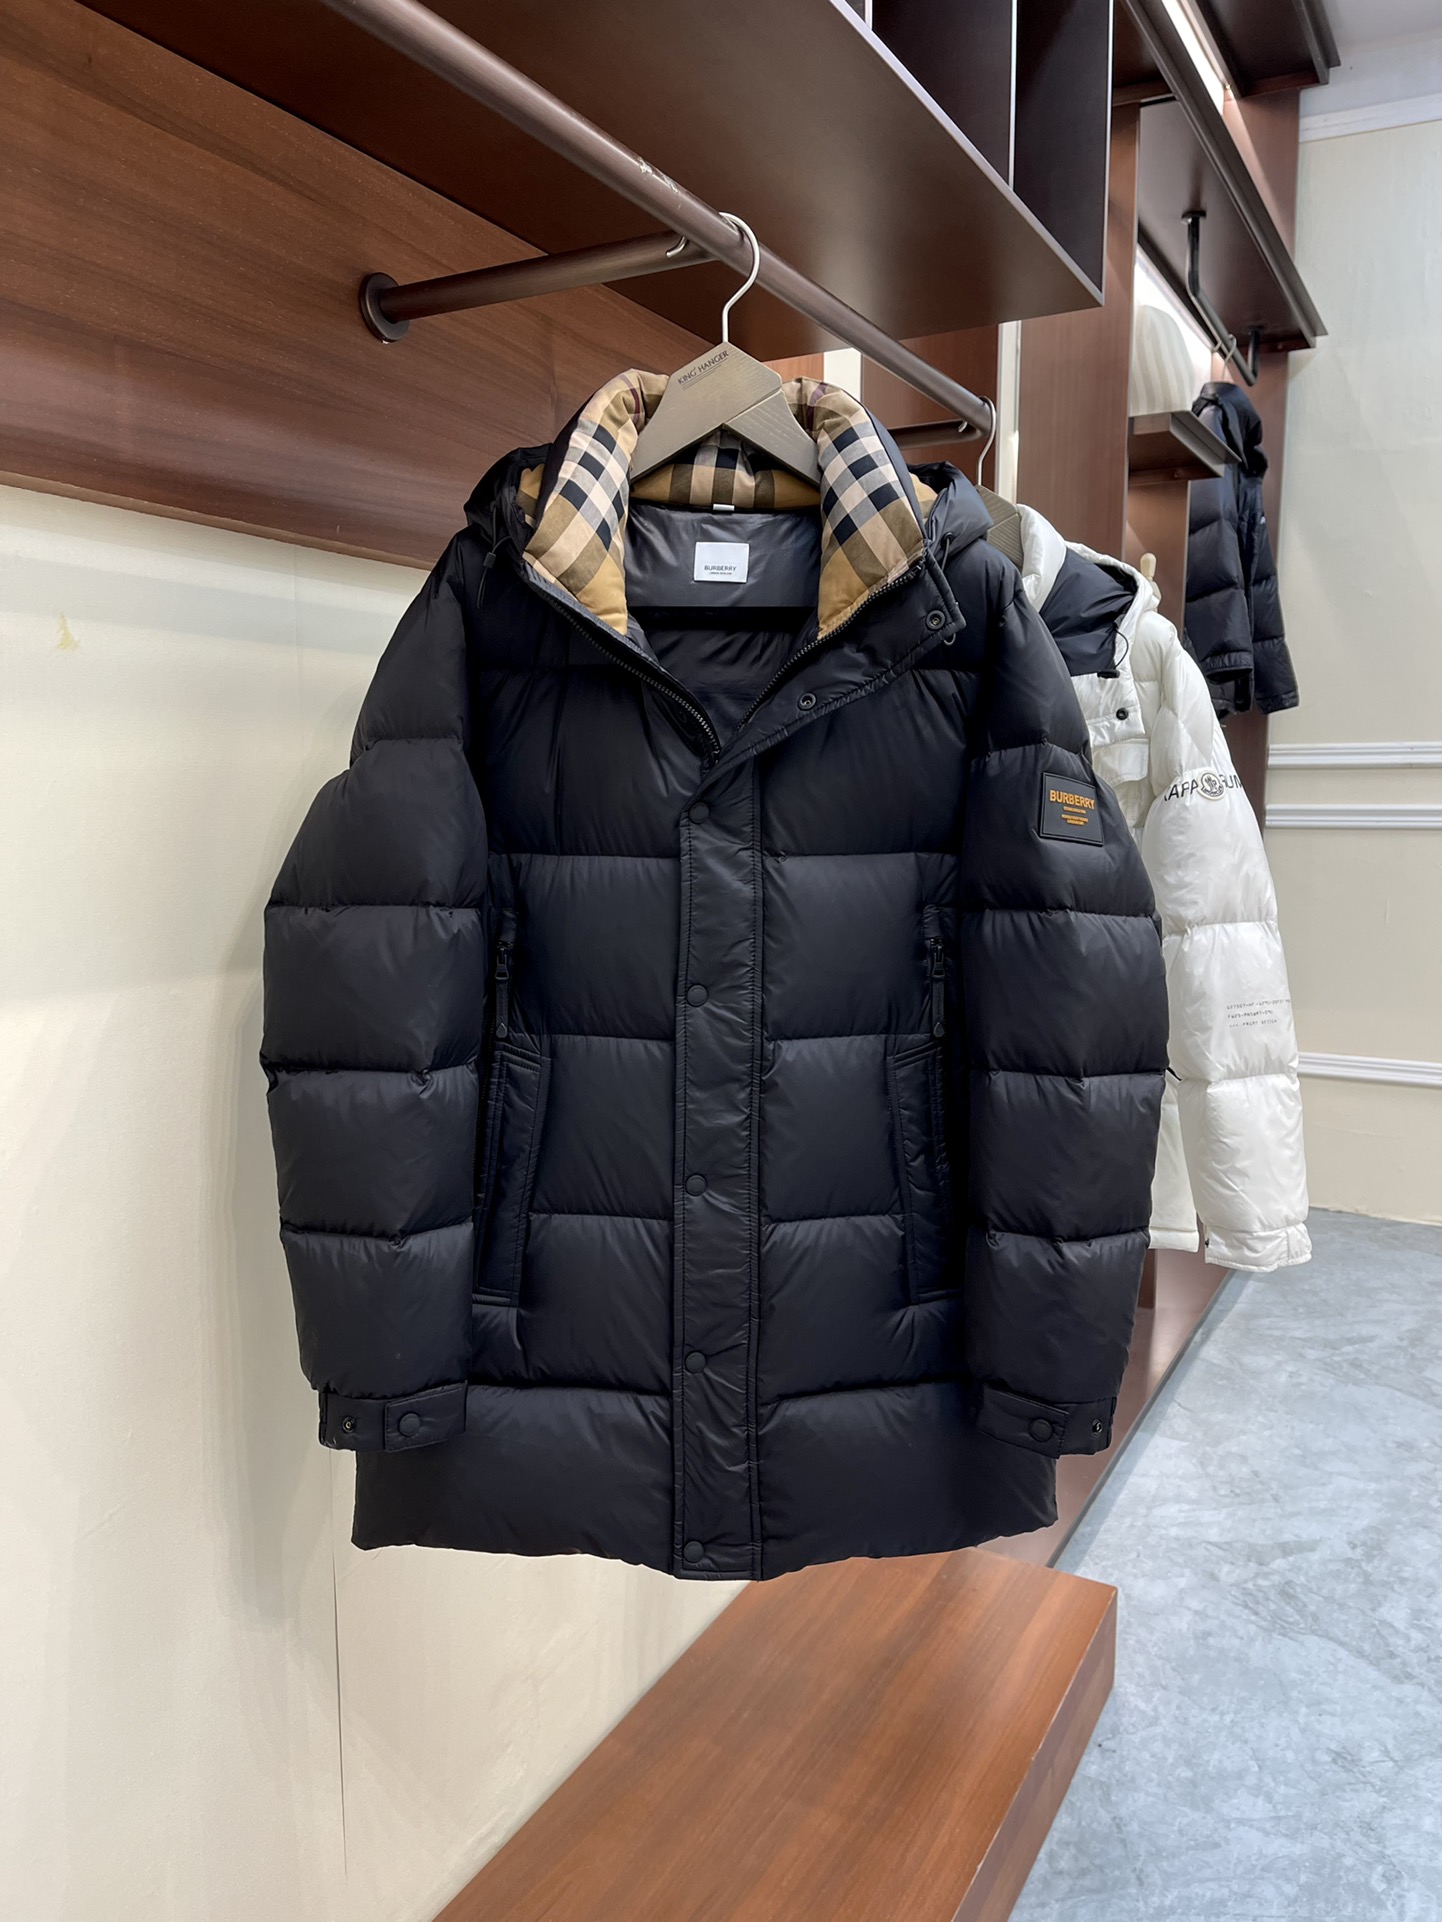 Burberry Clothing Down Jacket Polyester Silica Gel Fall/Winter Collection Fashion Hooded Top